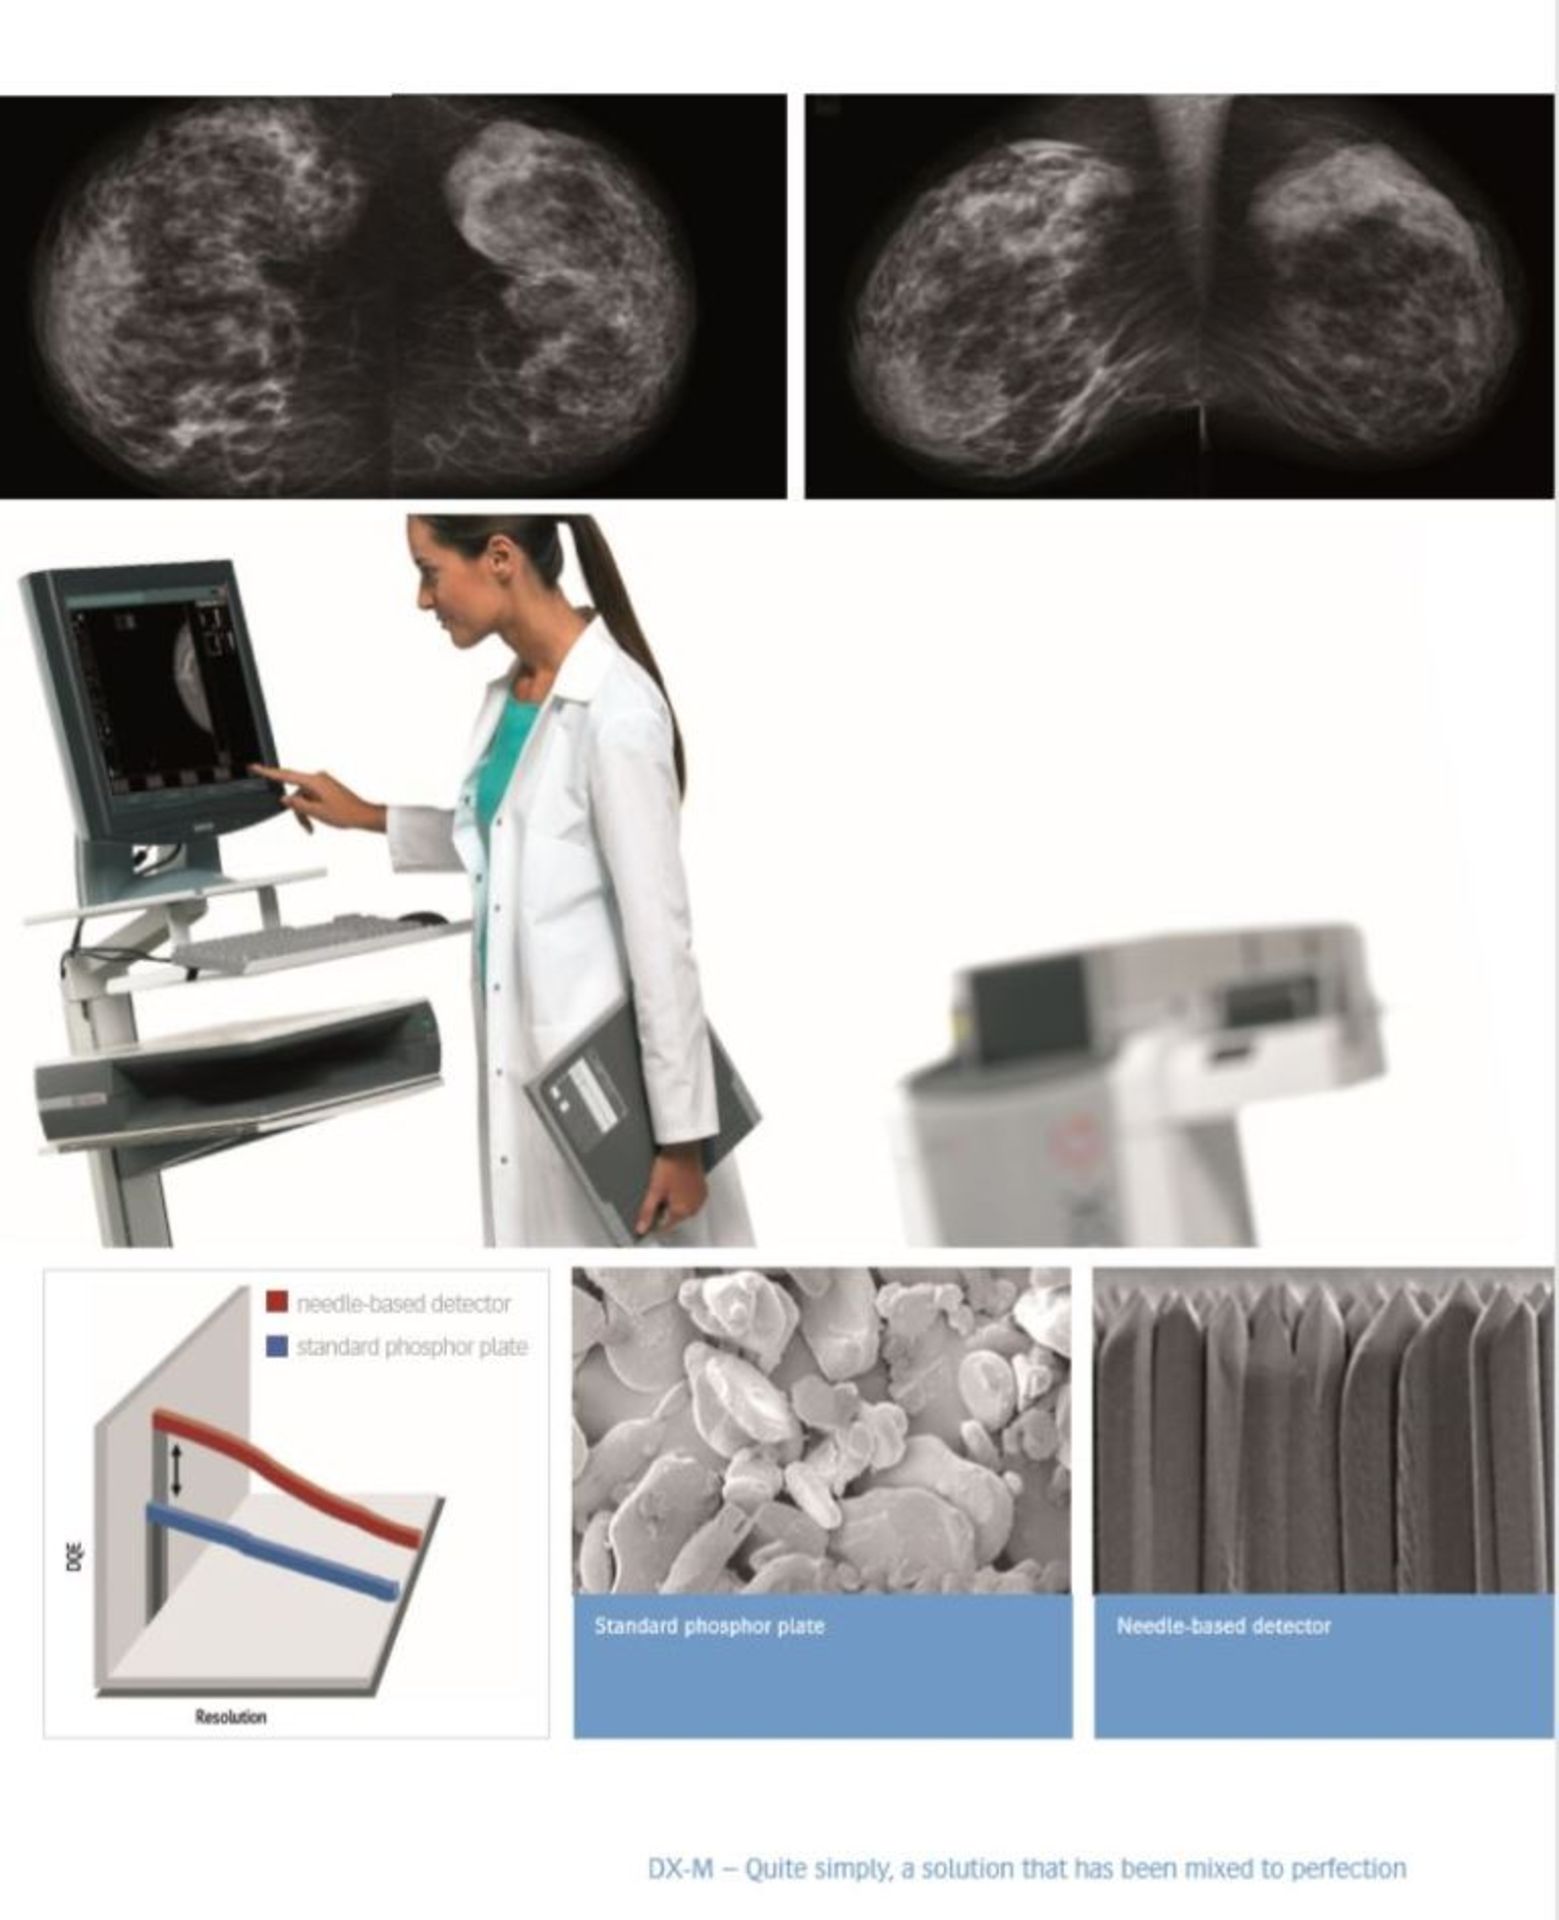 LOCATED OFF SITE - Agfa HealthCare’s DX-M CR (Computed Radiography) solution with needle-b - Image 11 of 16